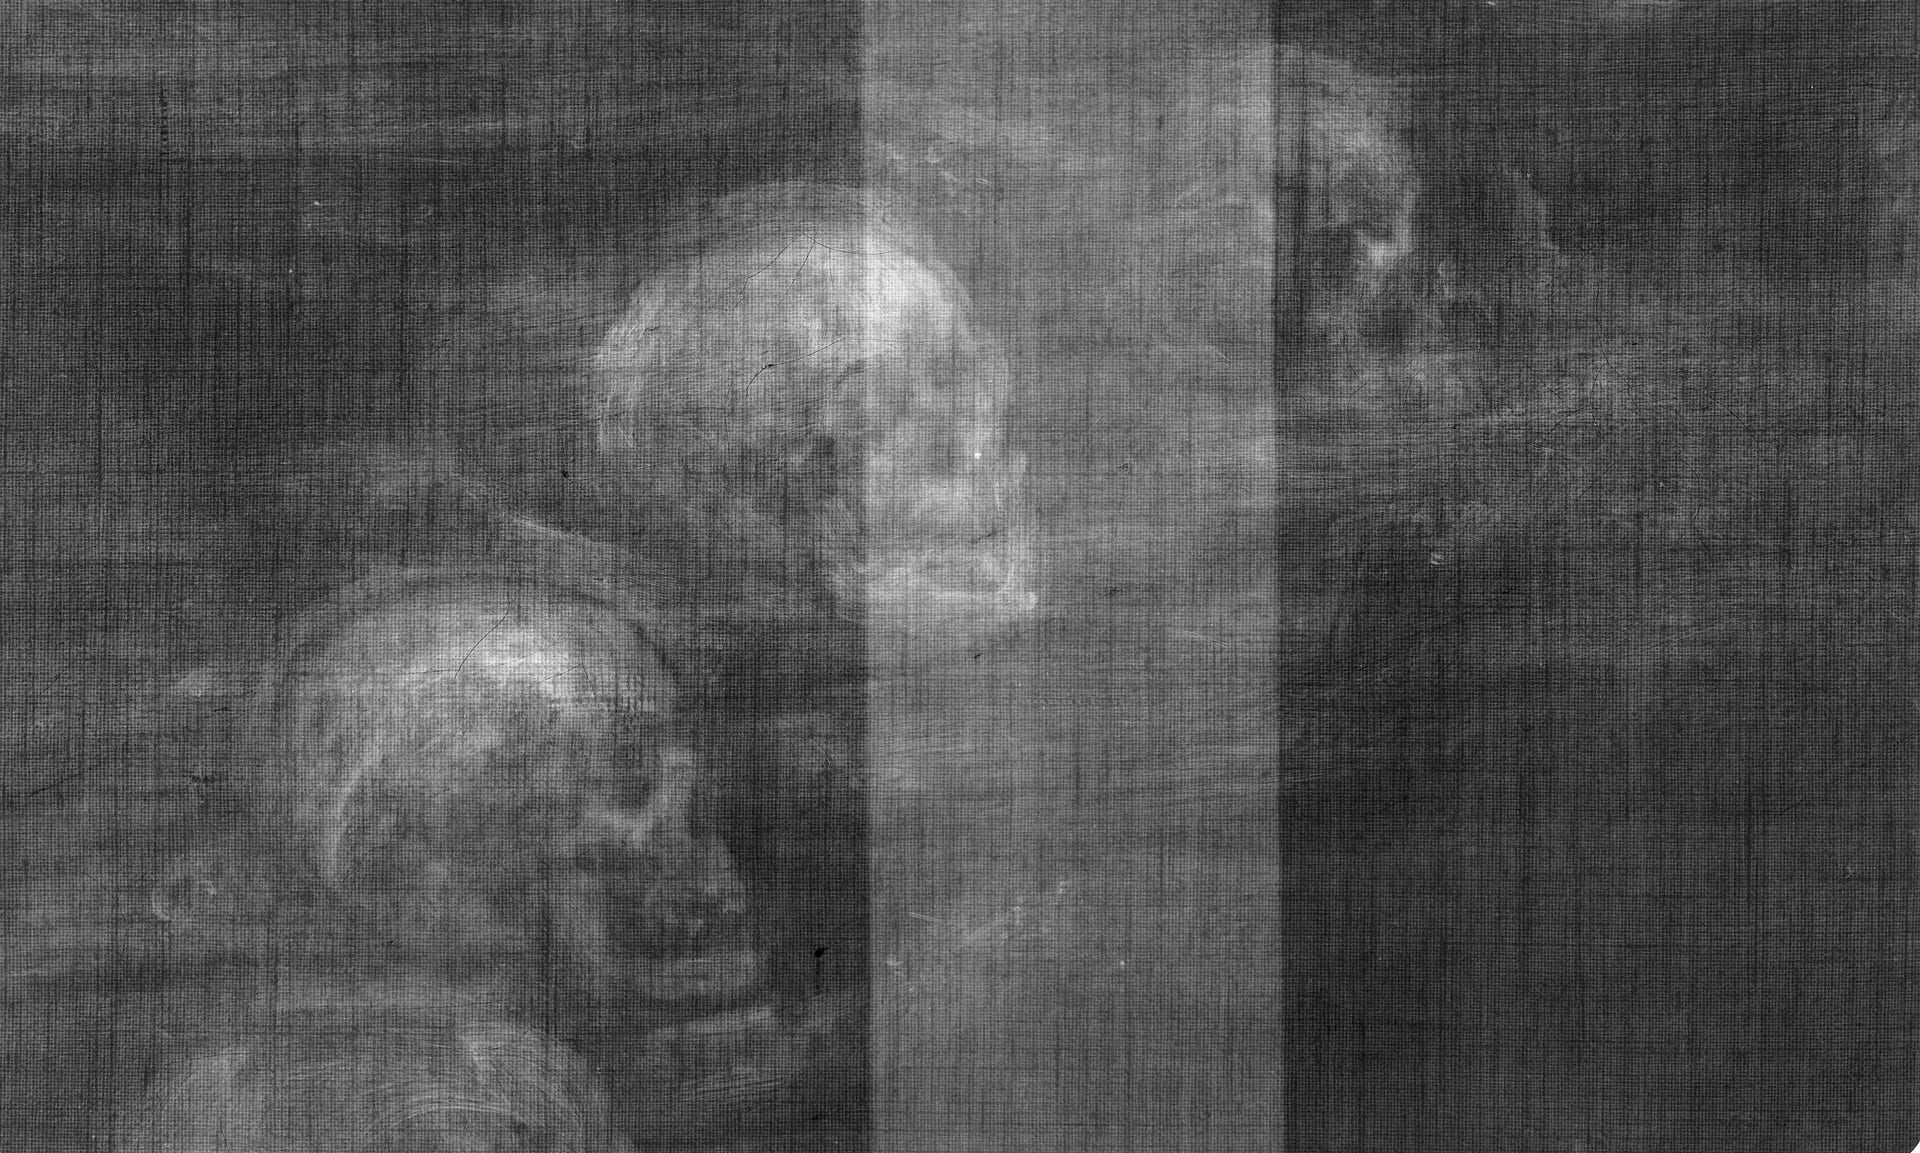 Detail of skulls discovered in Glindoni's painting of John Dee.